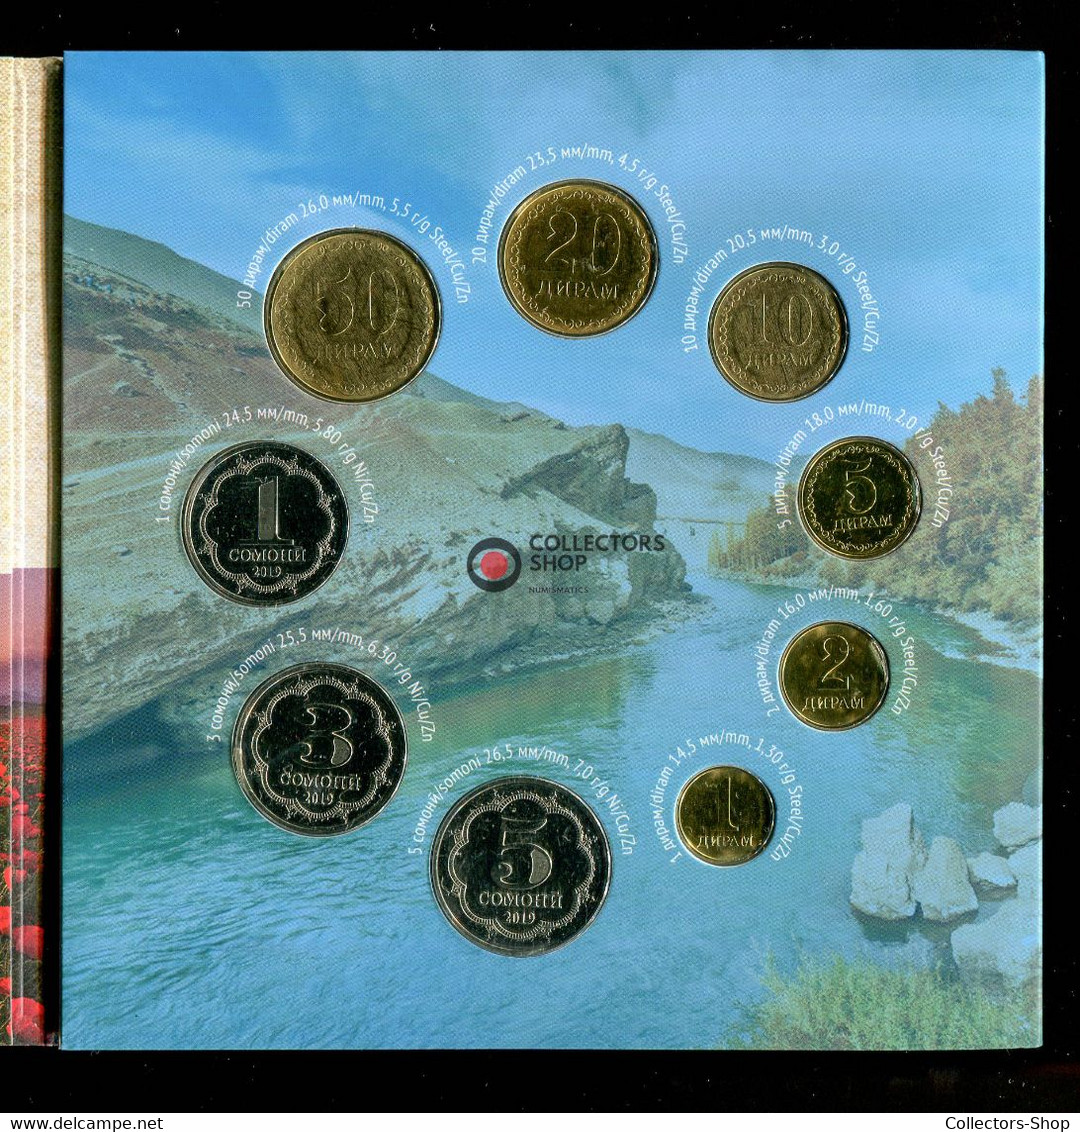 TAJIKISTAN: 2019 Year of Tourism completed set of 9 coins BU in original Folder album booklet